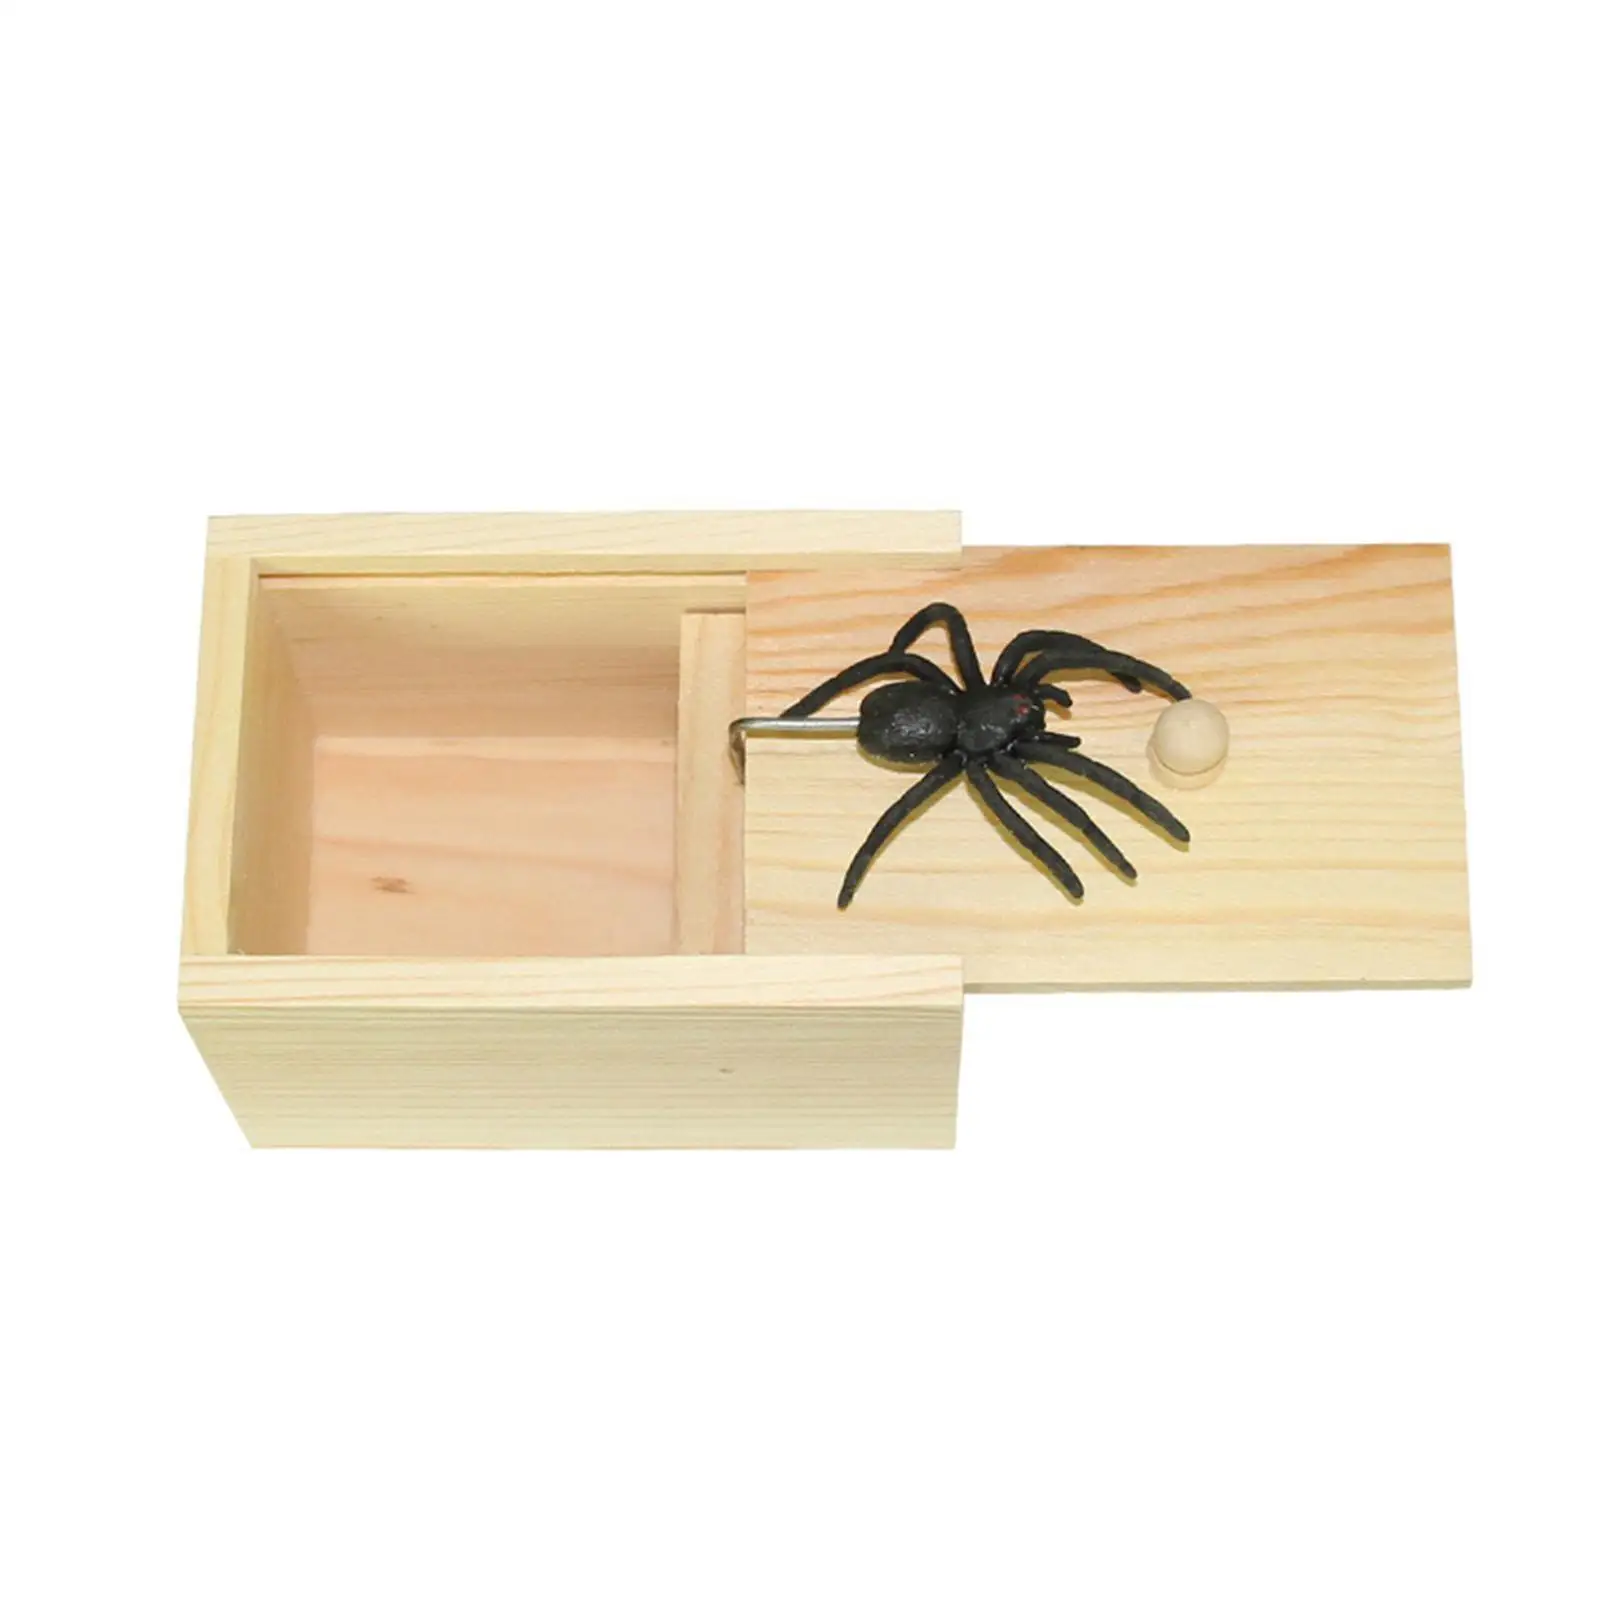 Wooden Prank Spider Scare Box Practical Joke Fun Scare Prank Gag Gifts Handcrafted Wooden Box Prank for Carnivals Kids